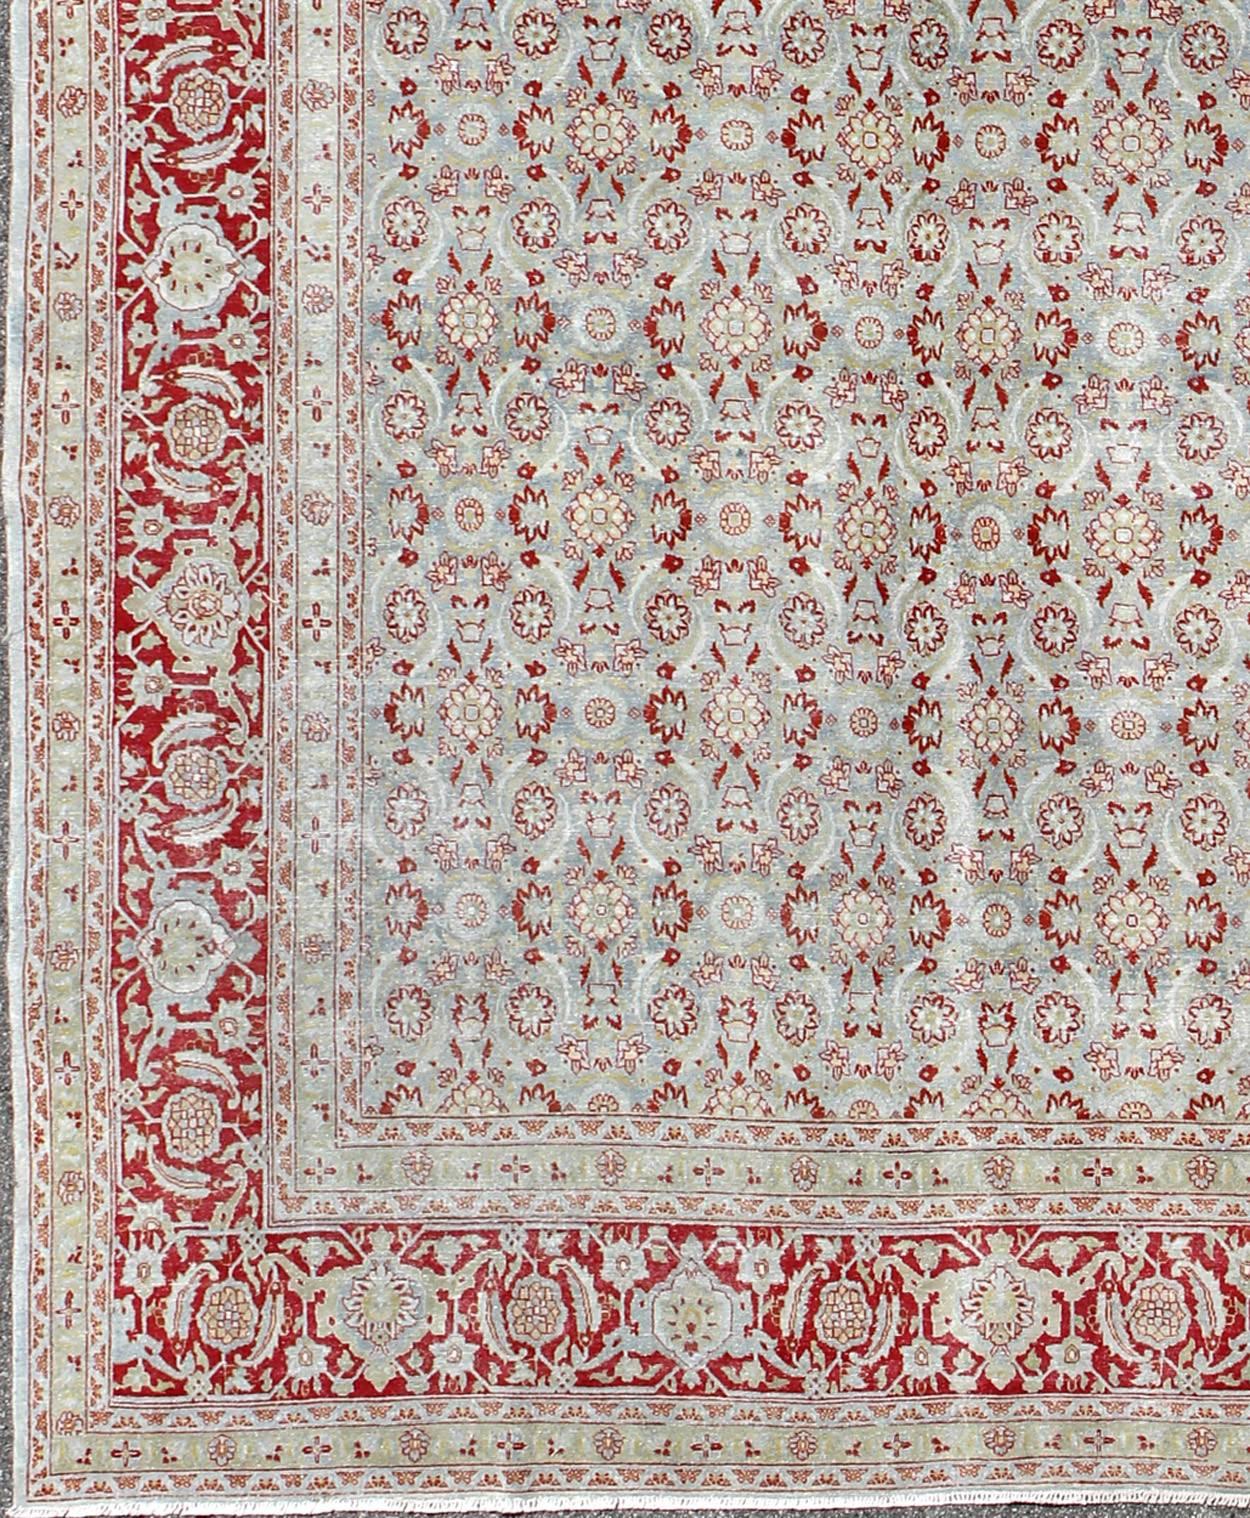 All-Over Floral Design Antique Persian Tabriz Rug in Shades of Gray-Blue and Red. Keivan Woven Arts / rug EMA-7513, country of origin / type: Iran / Tabriz, circa 1910
Measures: 11'2 x 14
This antique Persian Tabriz carpet (circa 1910) features both